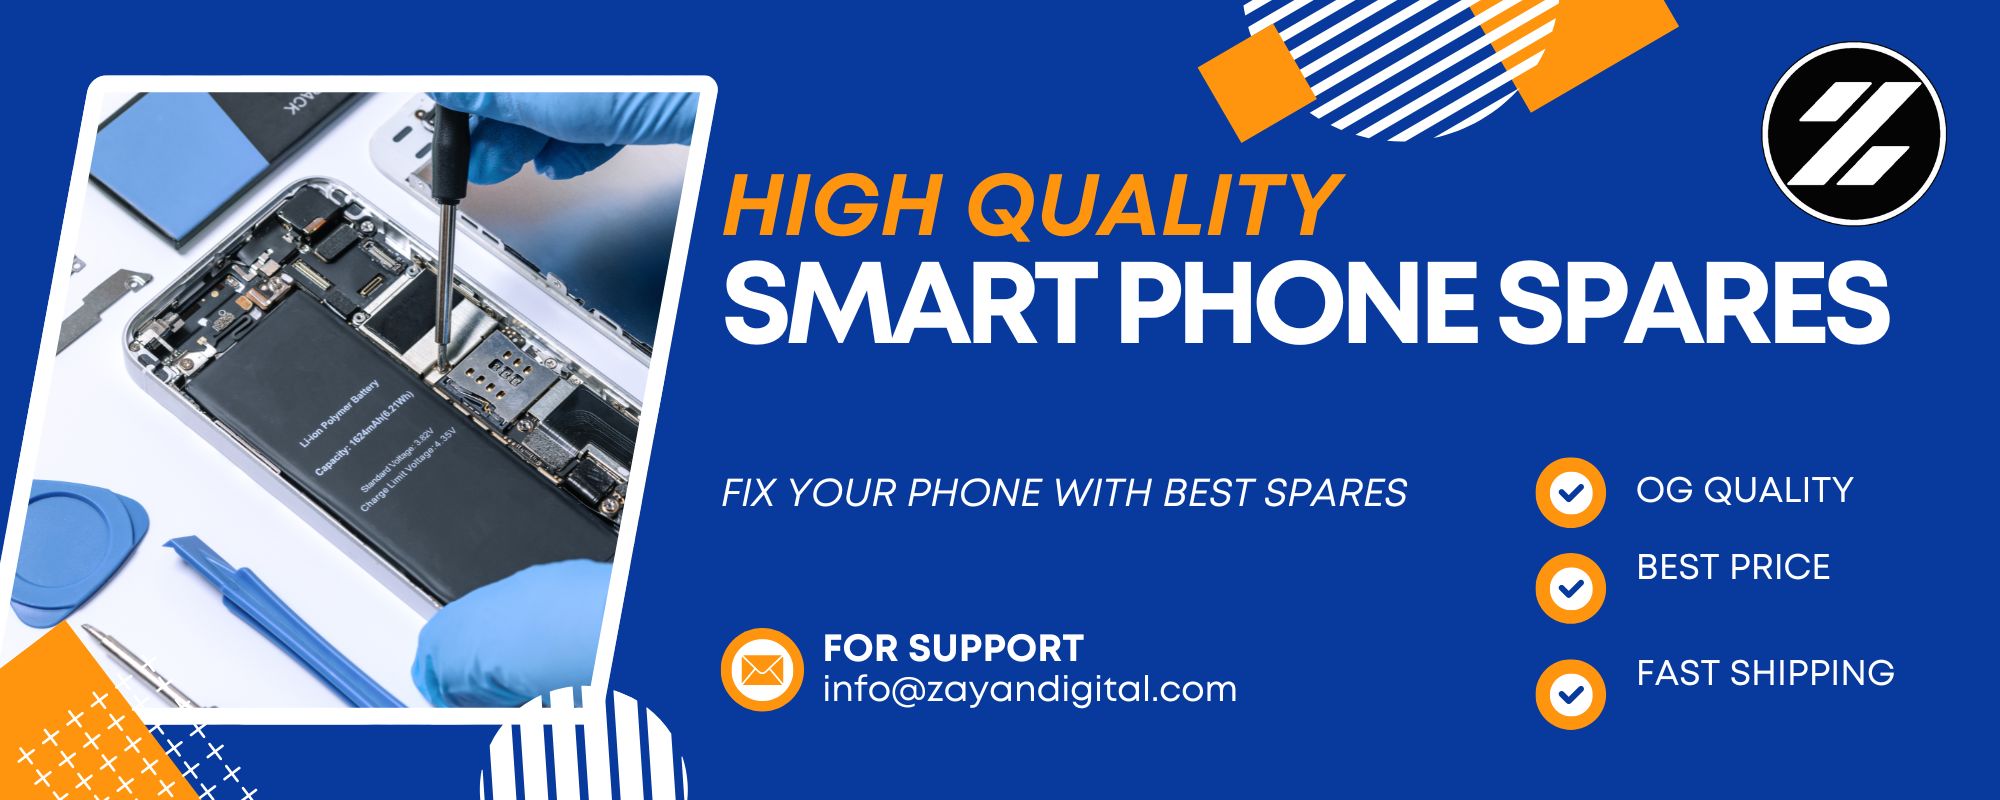 SMARTPHONE SPARES AT BEST PRICE- HIGH QUALITY SPARES ONLINE